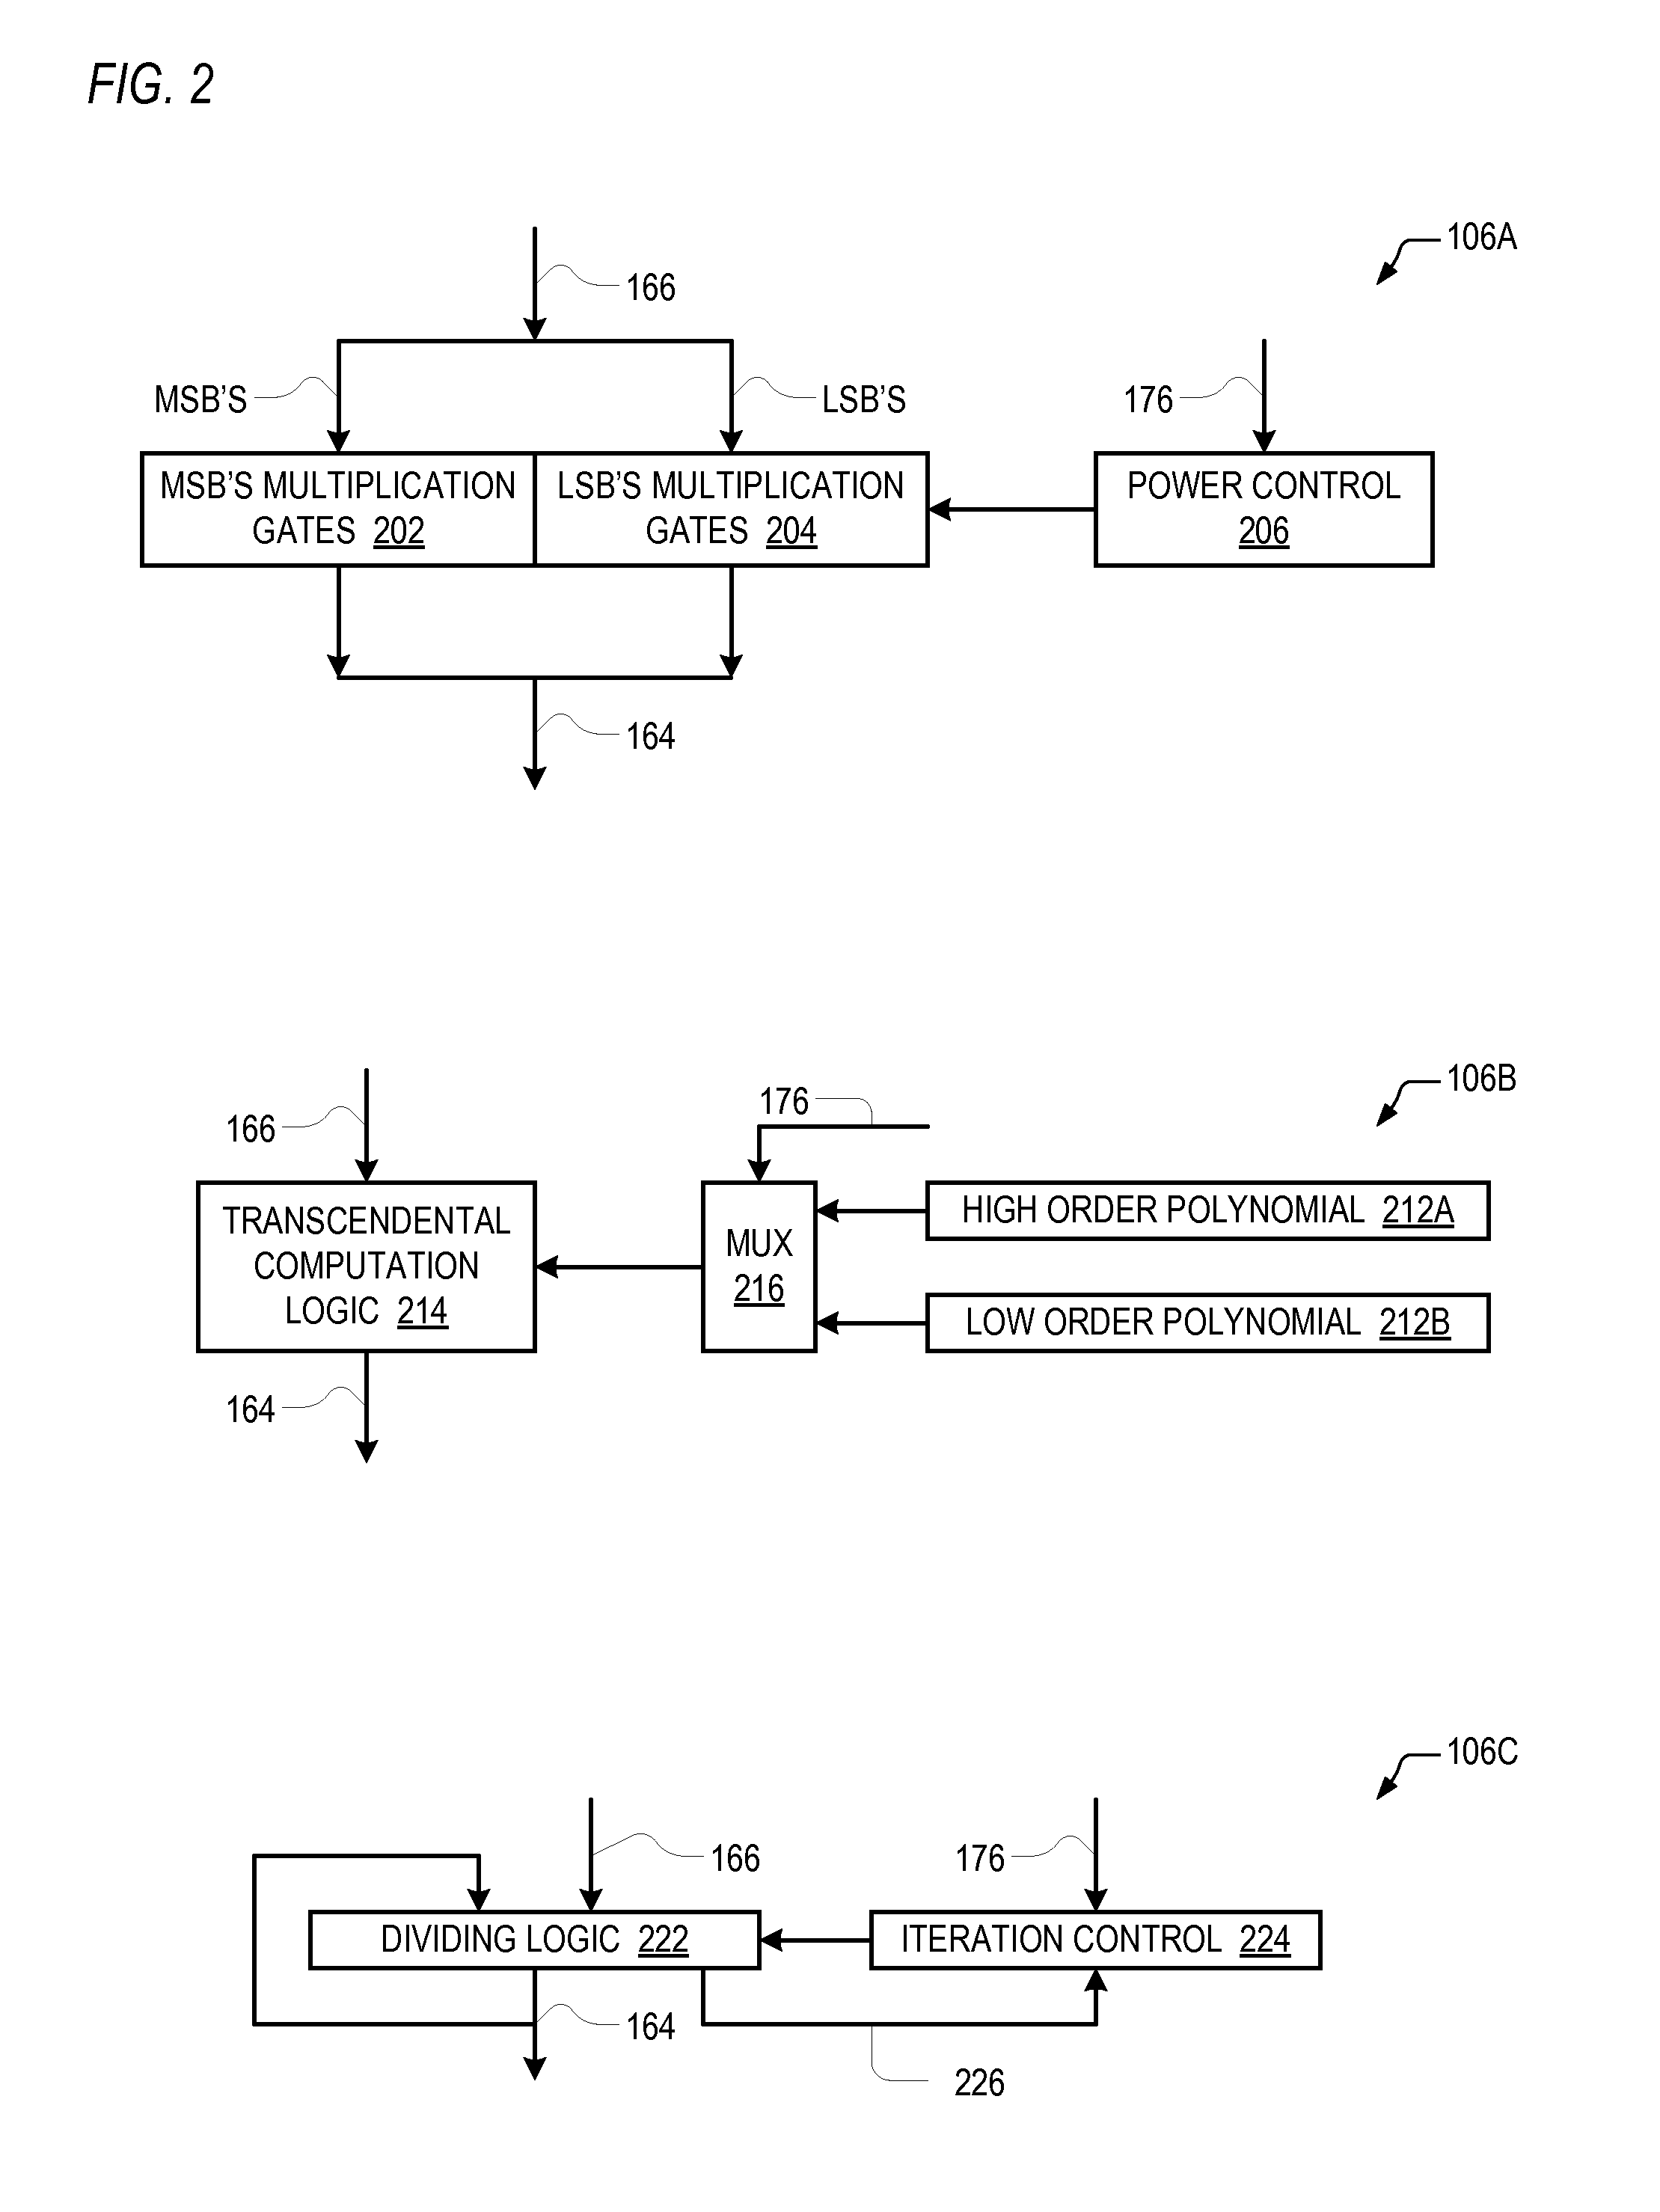 Processor that performs approximate computing instructions